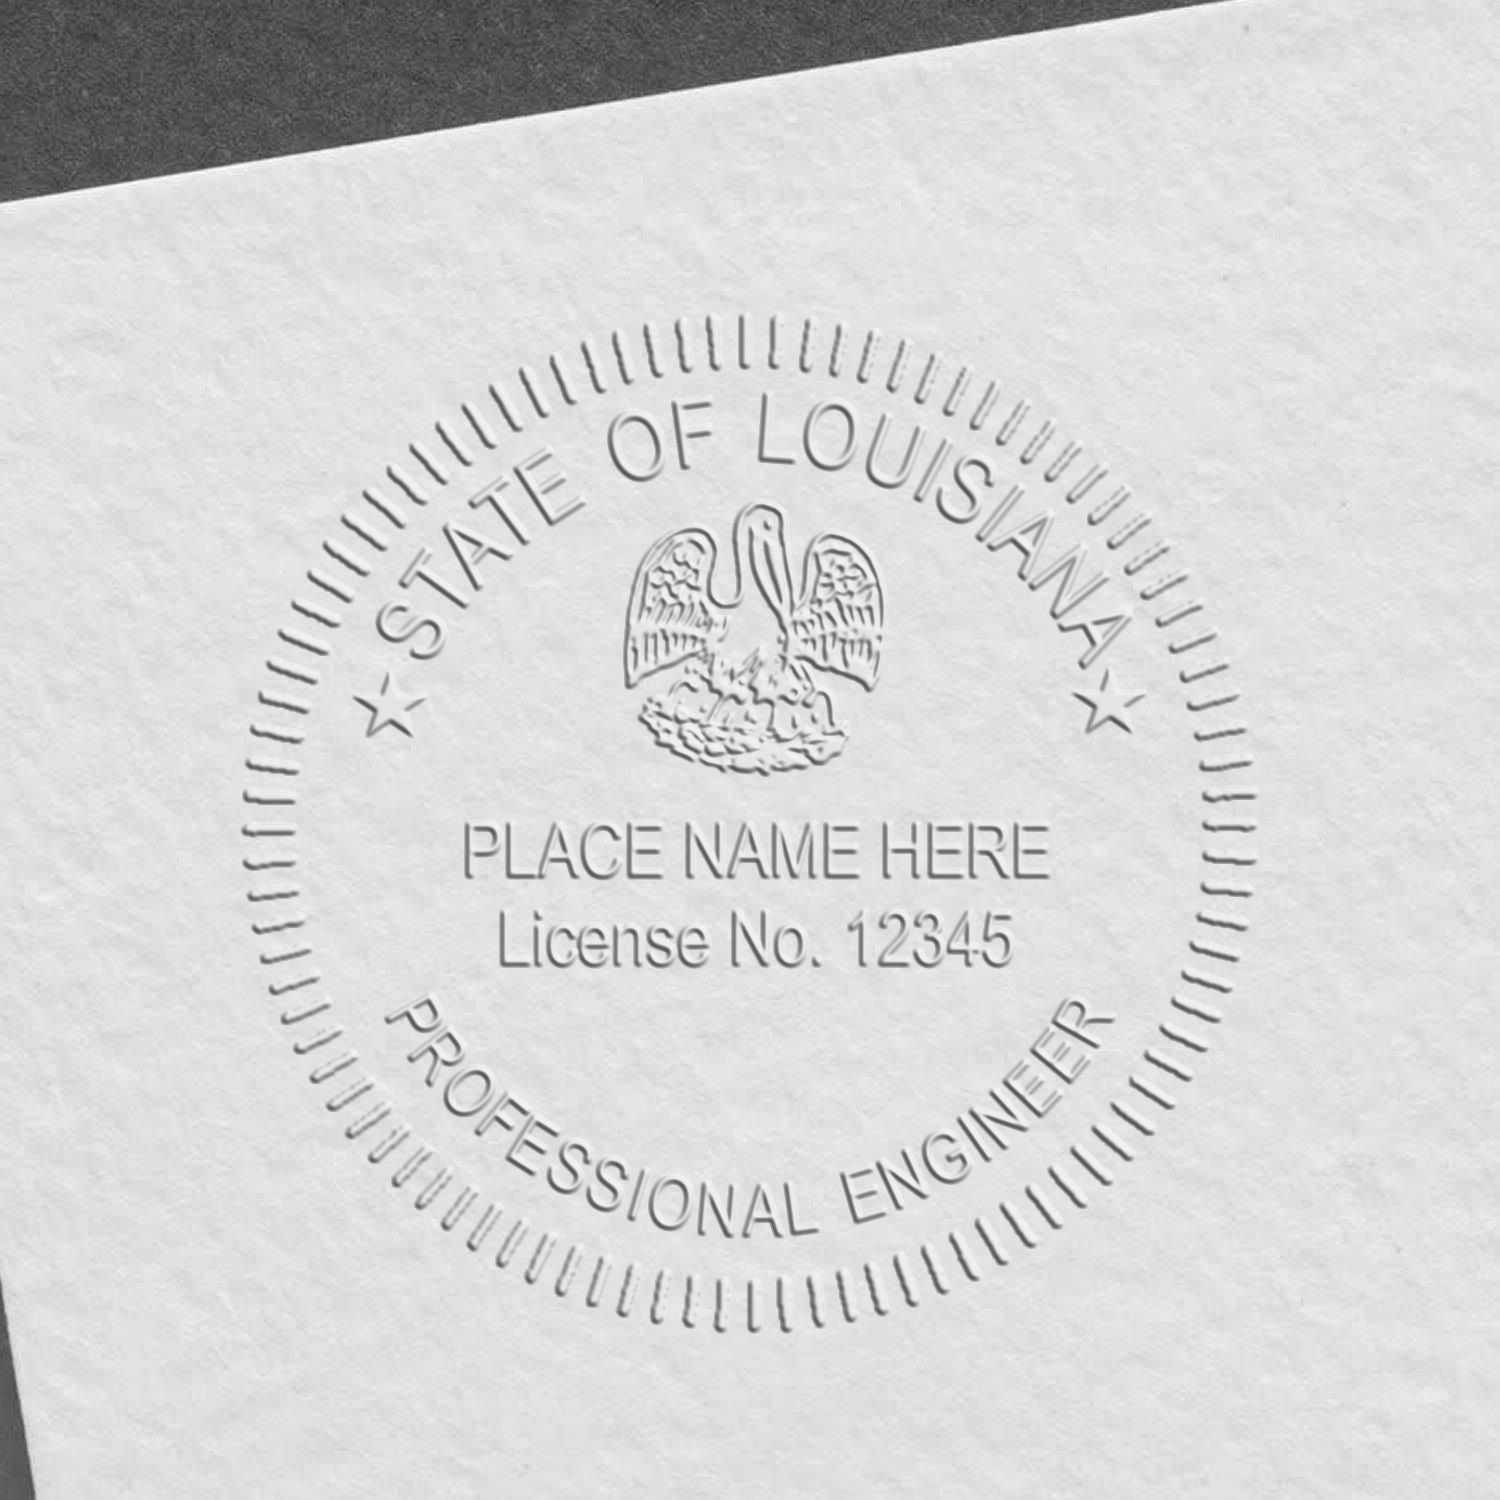 A lifestyle photo showing a stamped image of the Handheld Louisiana Professional Engineer Embosser on a piece of paper